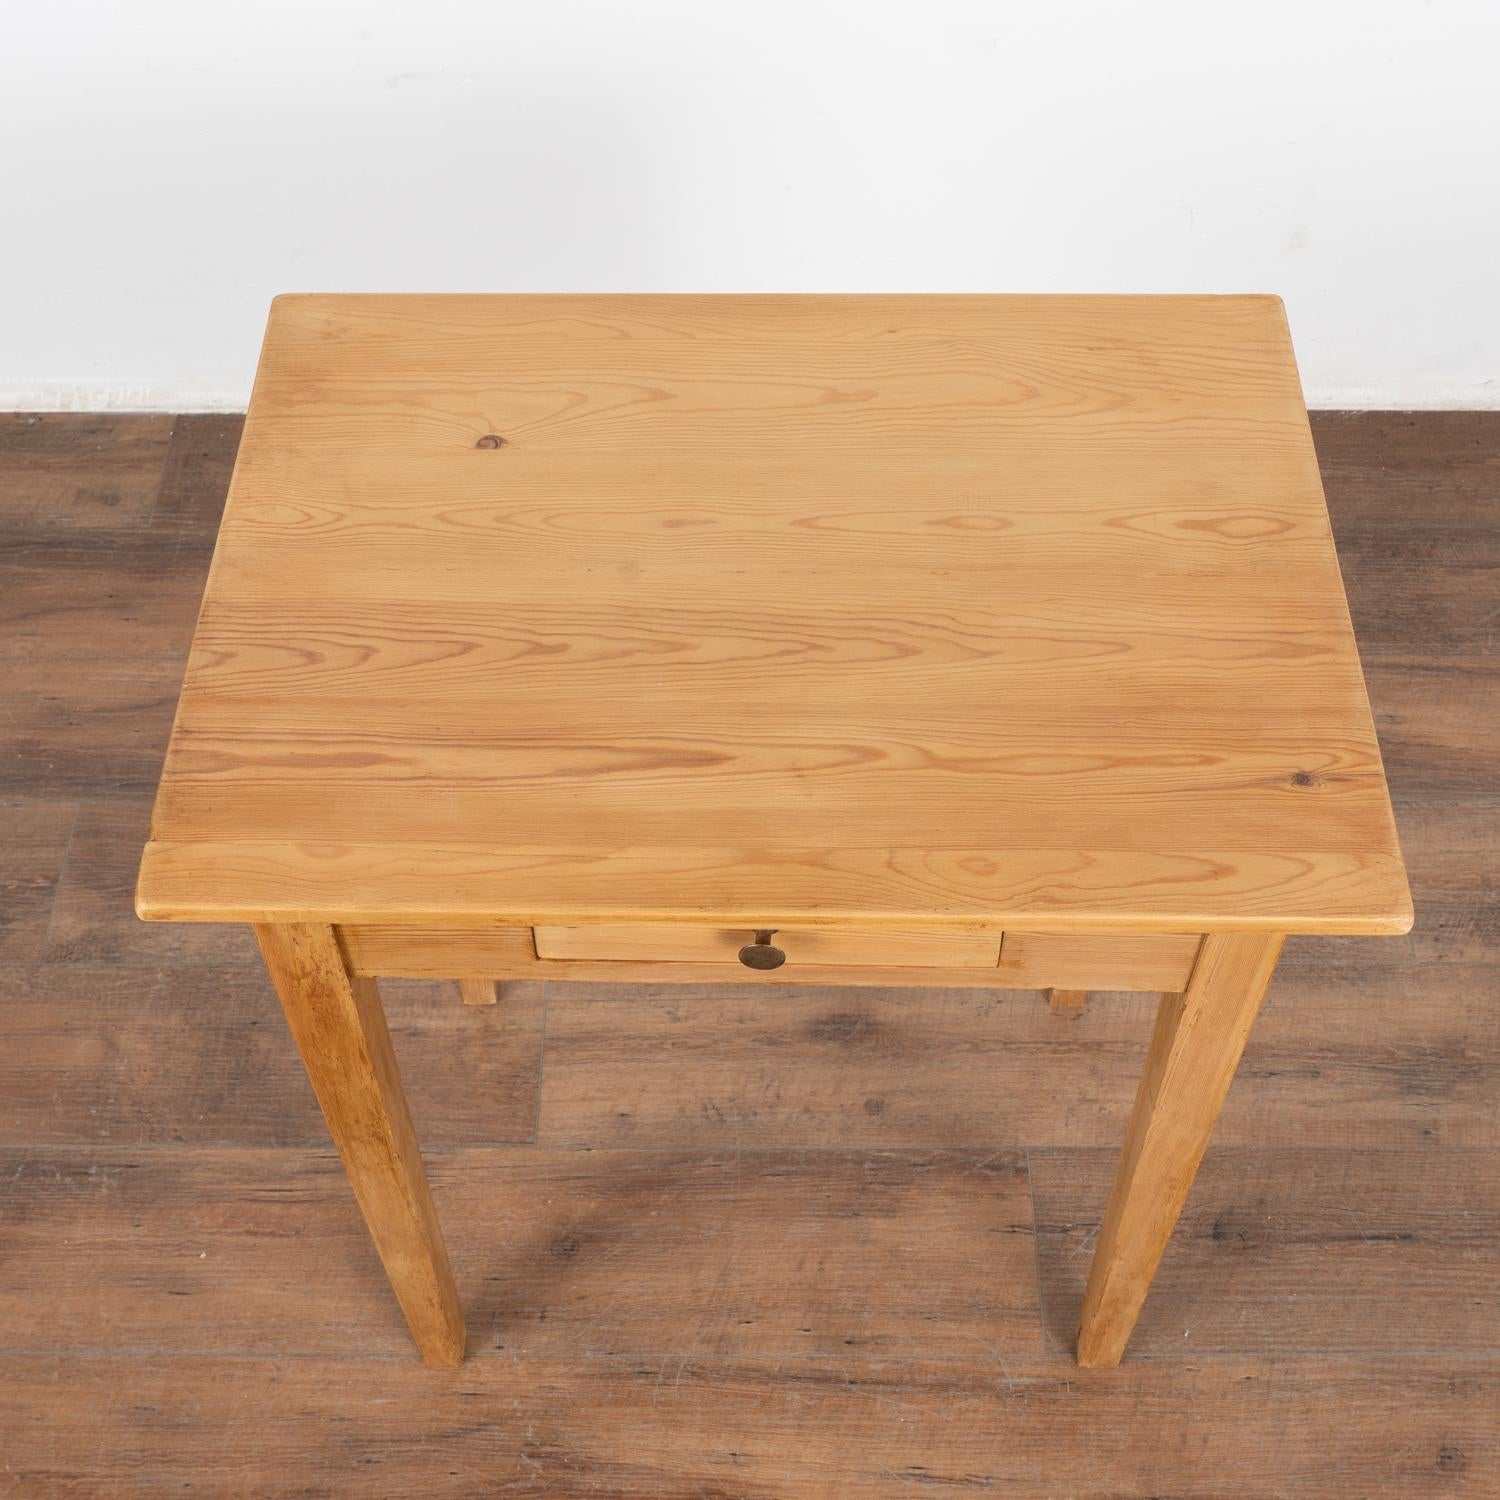 20th Century Small Pine Side Table With Tapered Legs, Denmark circa 1900's For Sale